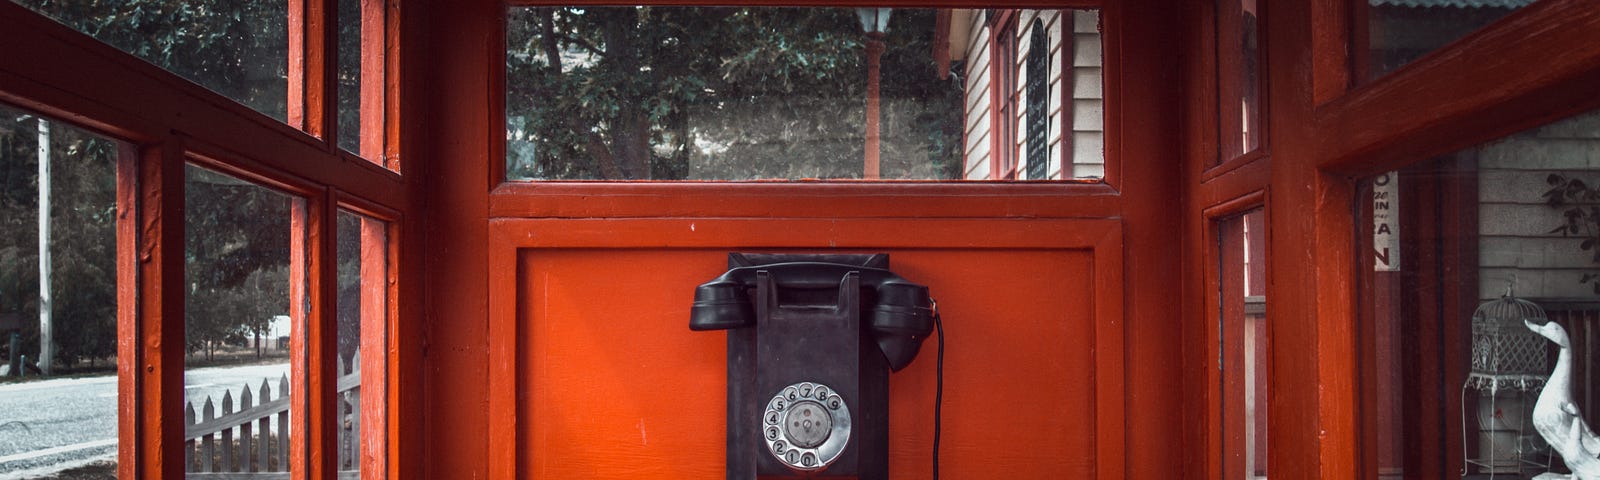 Antigue phone inside a large wooden phone booth with windows